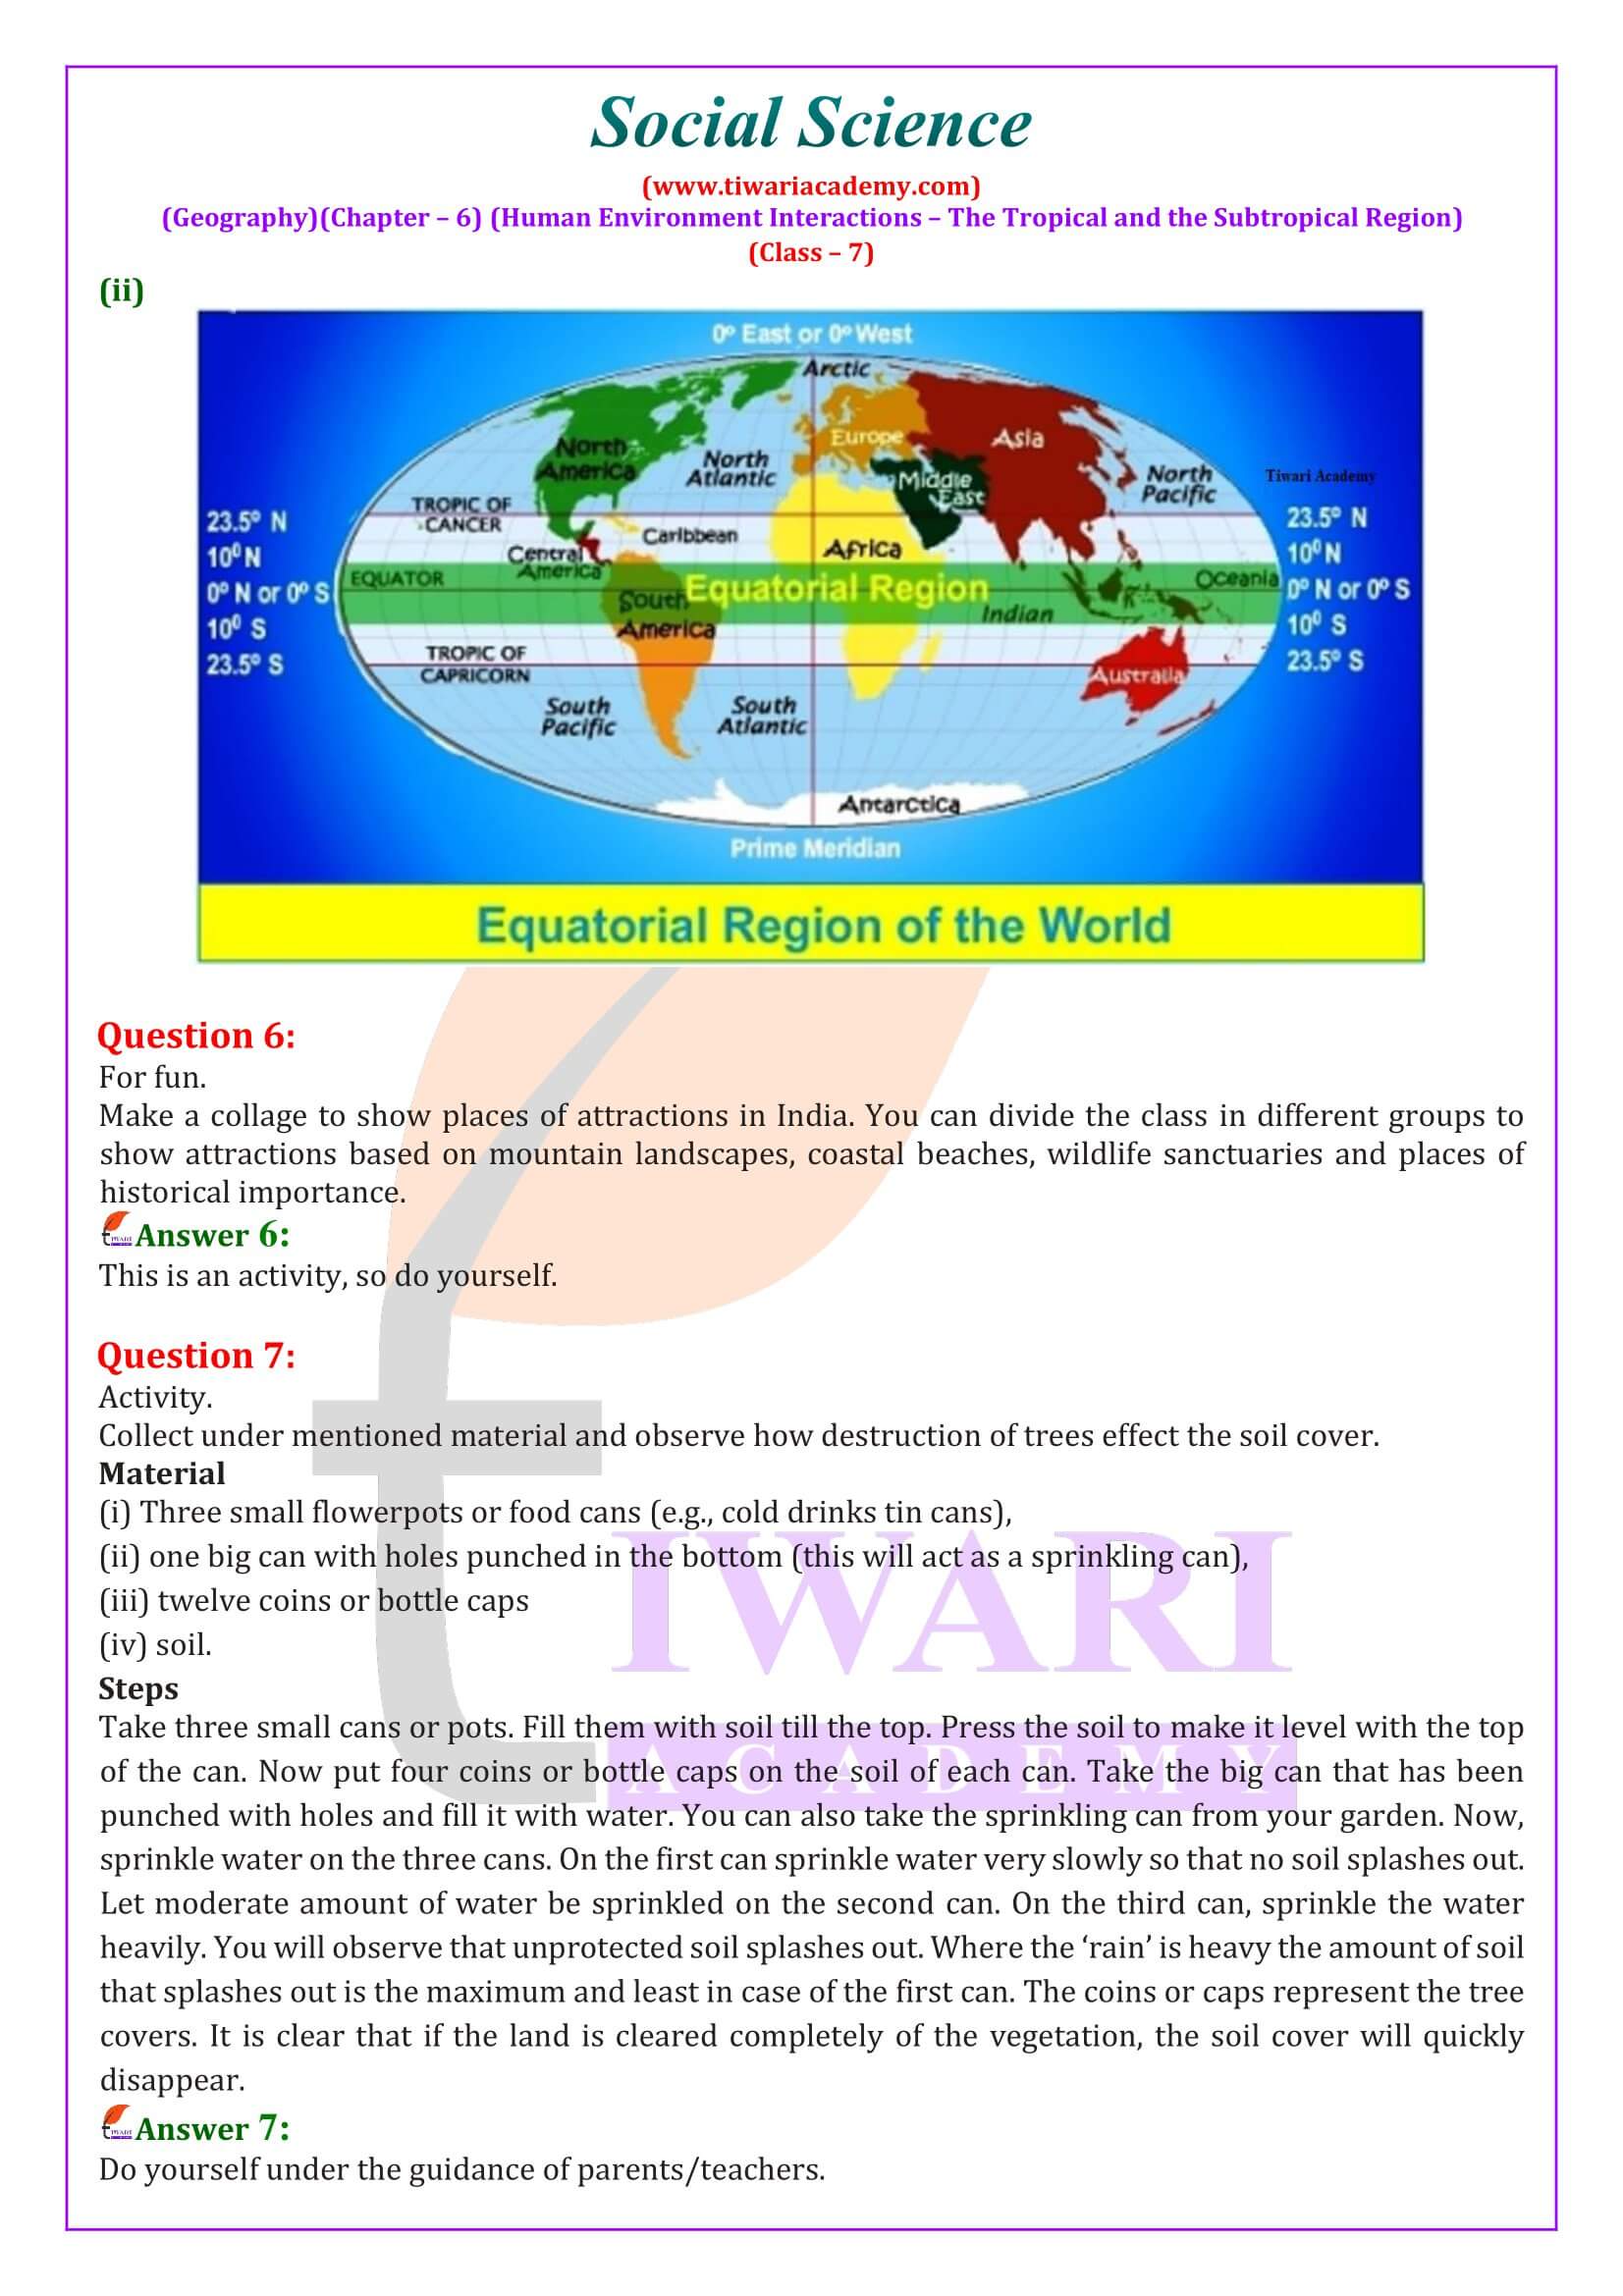 NCERT Solutions for Class 7 Geography Chapter 6